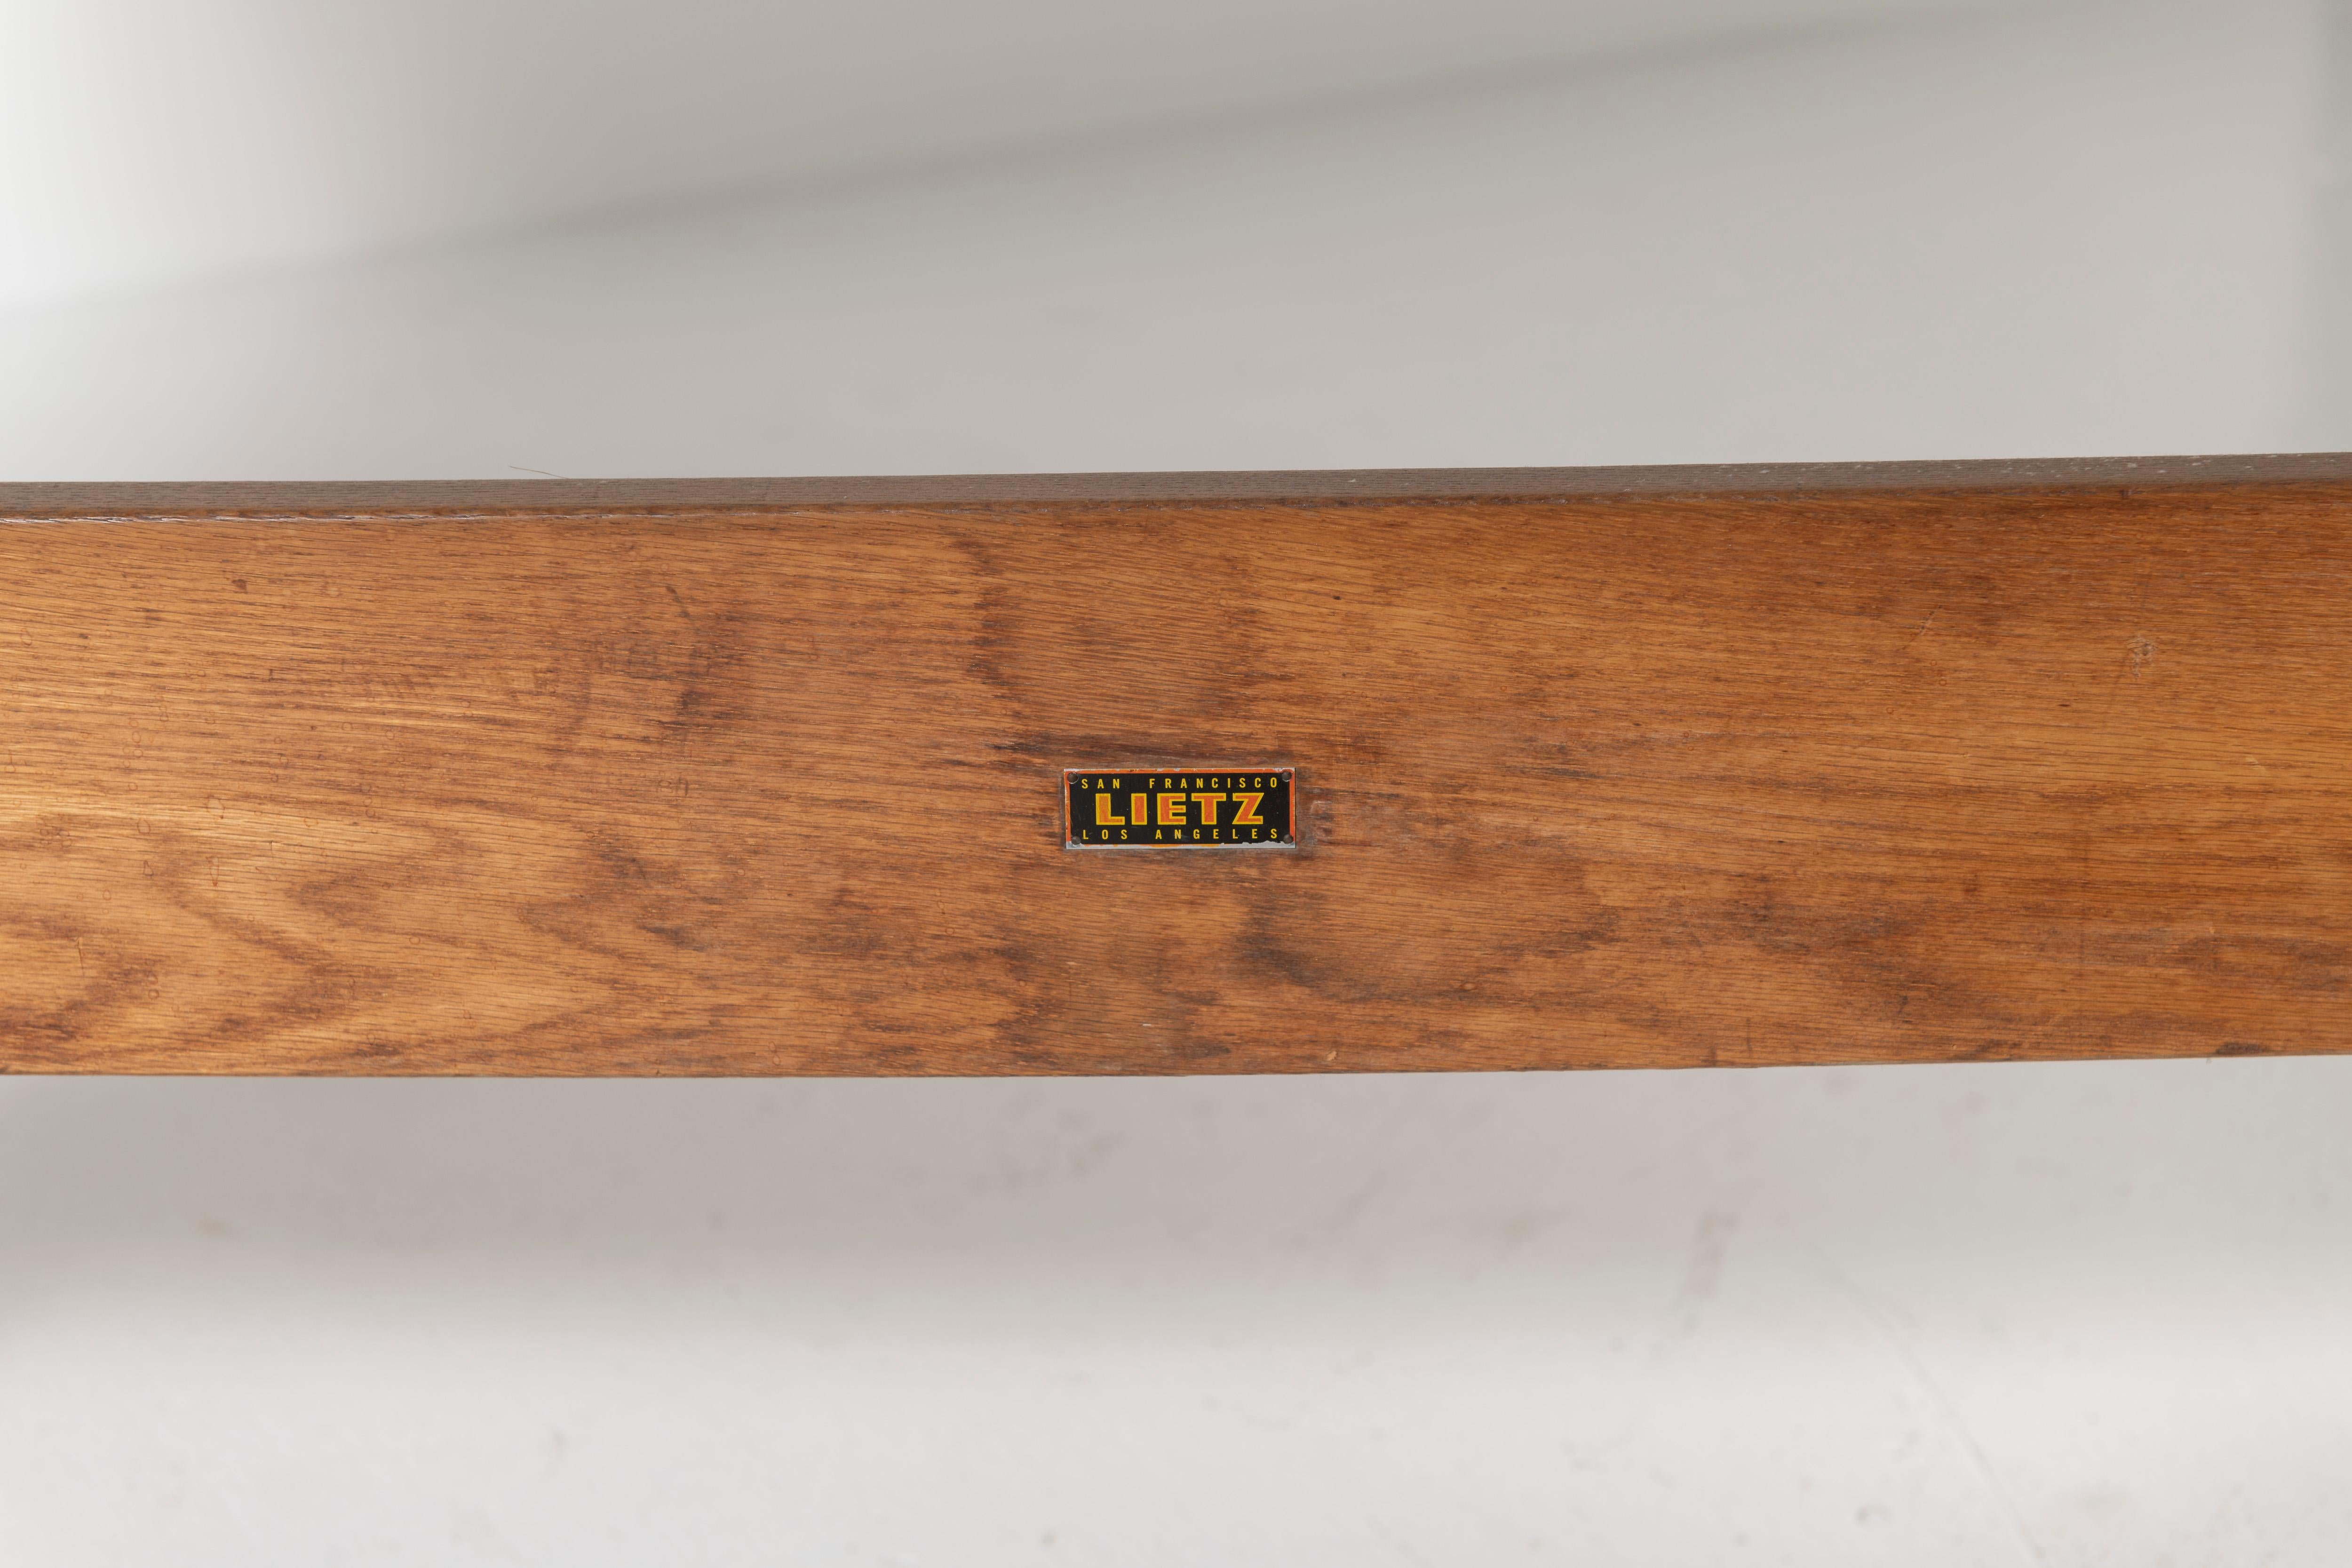 Crafted in San Francisco in the 1940s, this vintage Lietz drafting table is made of maple and cast iron base. The table is conveniently adjustable and functional.  
Original label is present and the table is in good condition, could be enhanced with